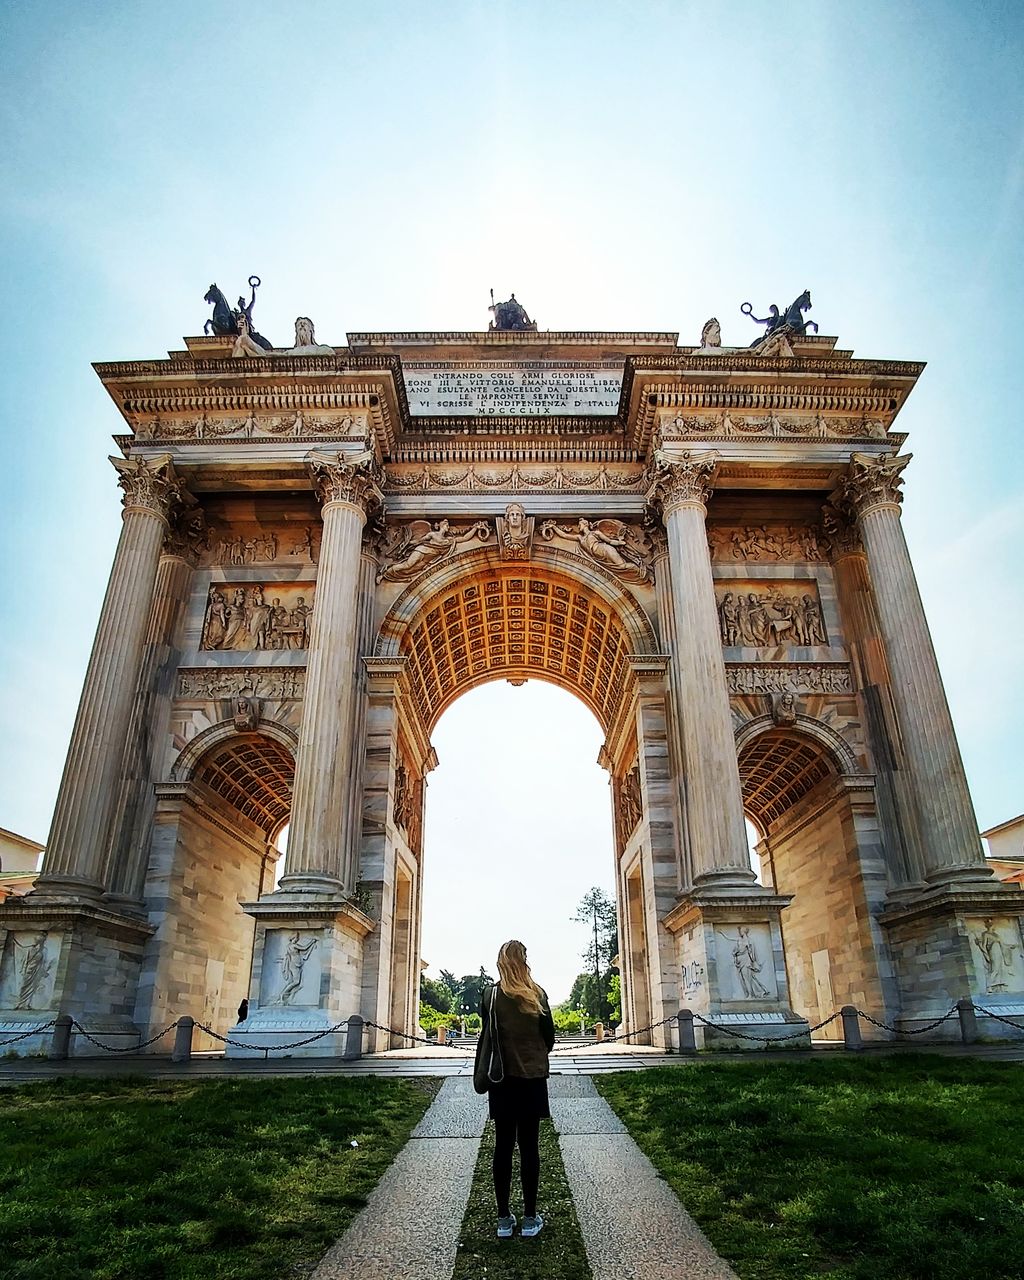 Rear view of woman standing at triumphal arch against sky